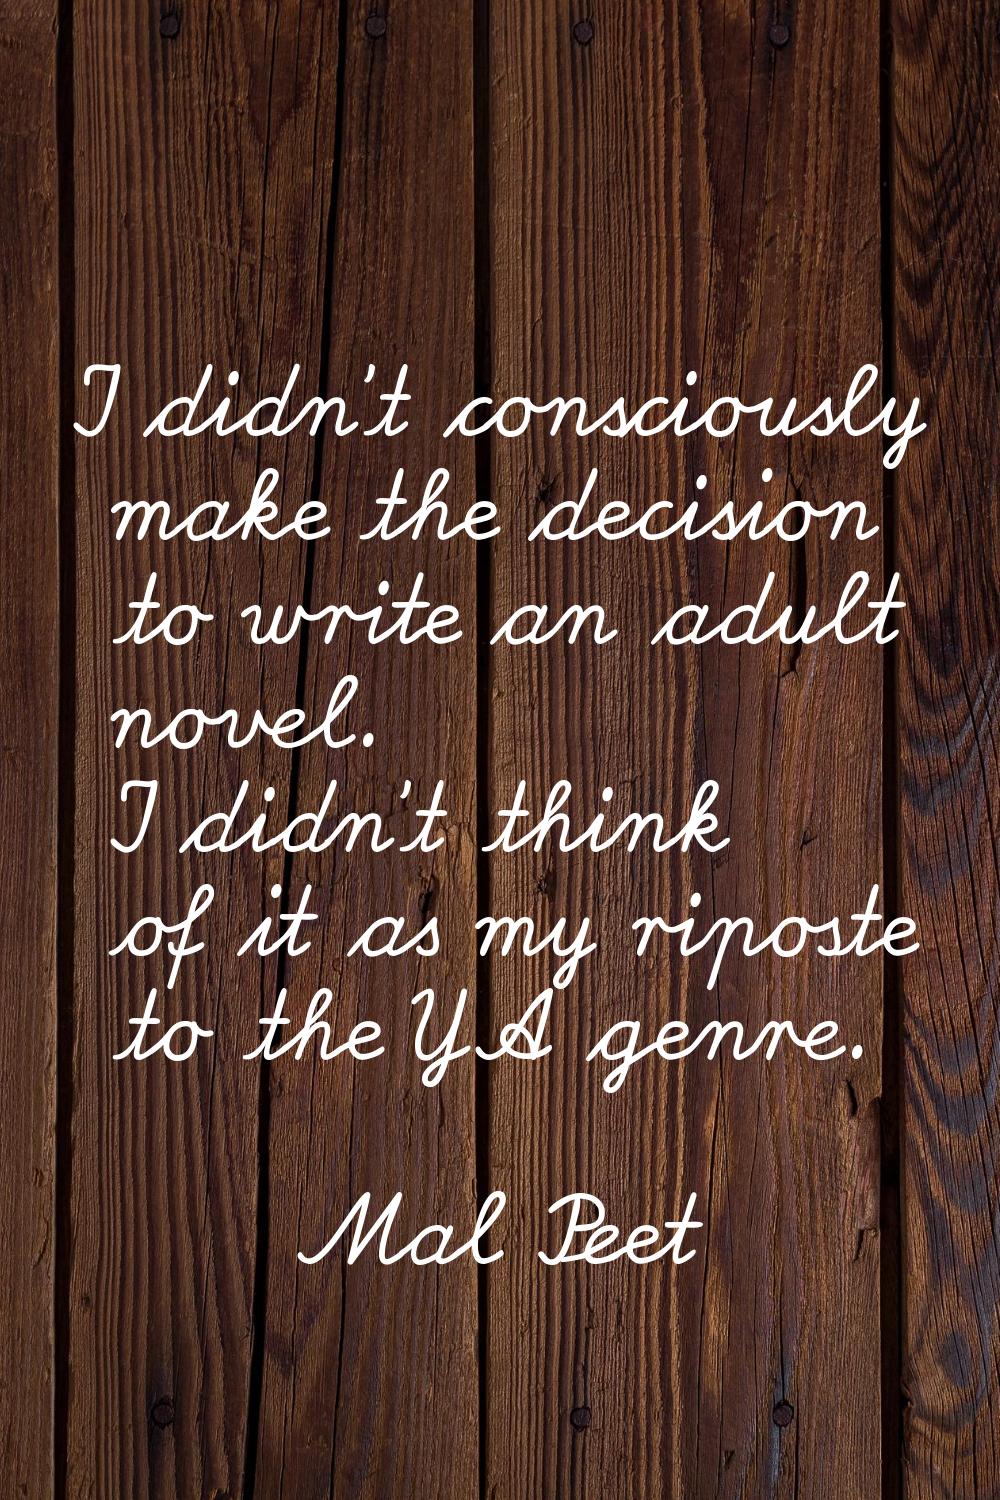 I didn't consciously make the decision to write an adult novel. I didn't think of it as my riposte 